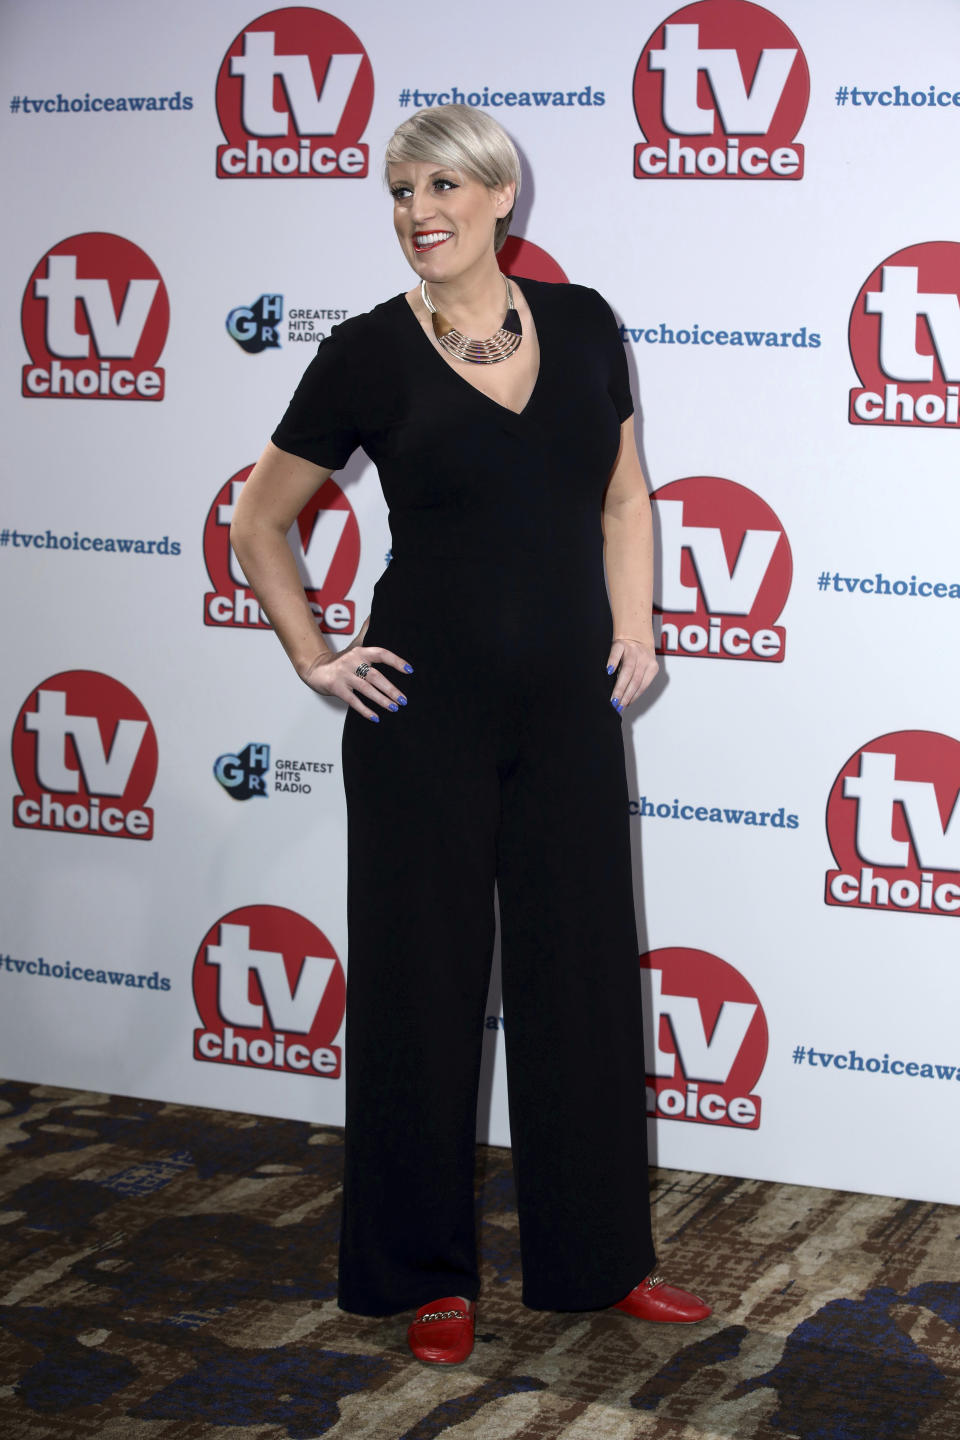 TV presenter Steph McGovern poses for photographers on arrival at the TV Choice Awards in central London on Monday, Sept. 9, 2019. (Photo by Grant Pollard/Invision/AP)